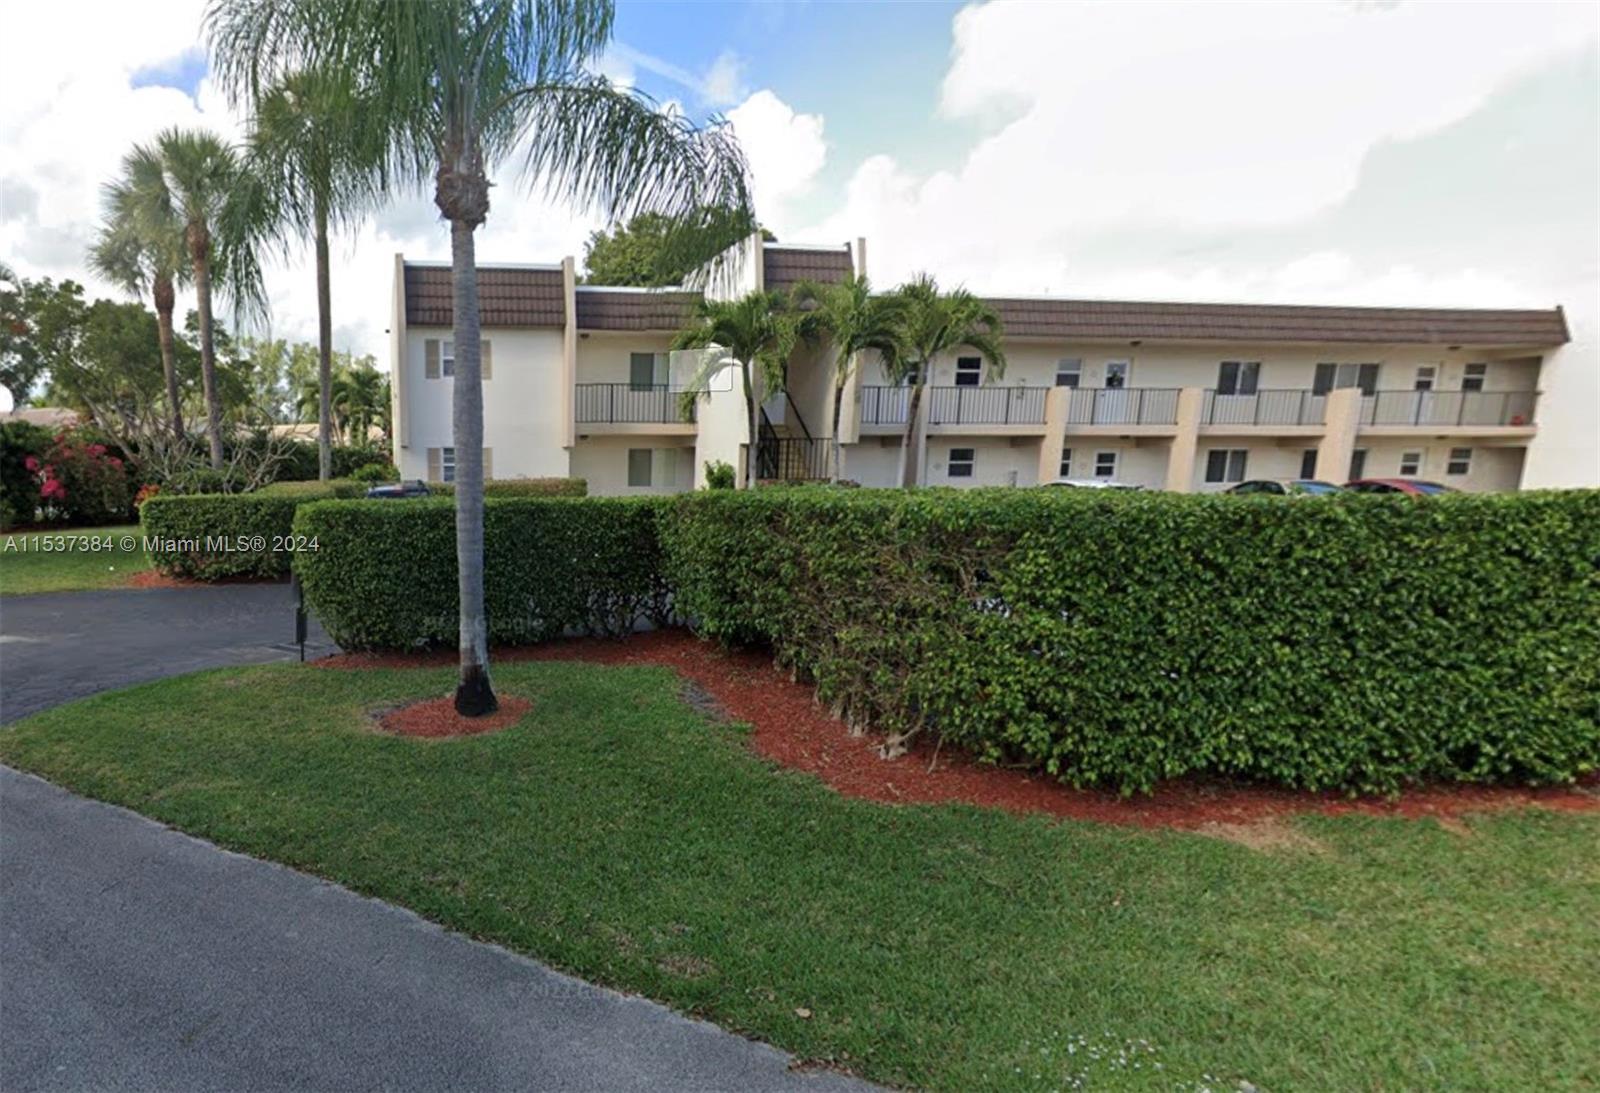 Photo of Address Not Disclosed in Delray Beach, FL